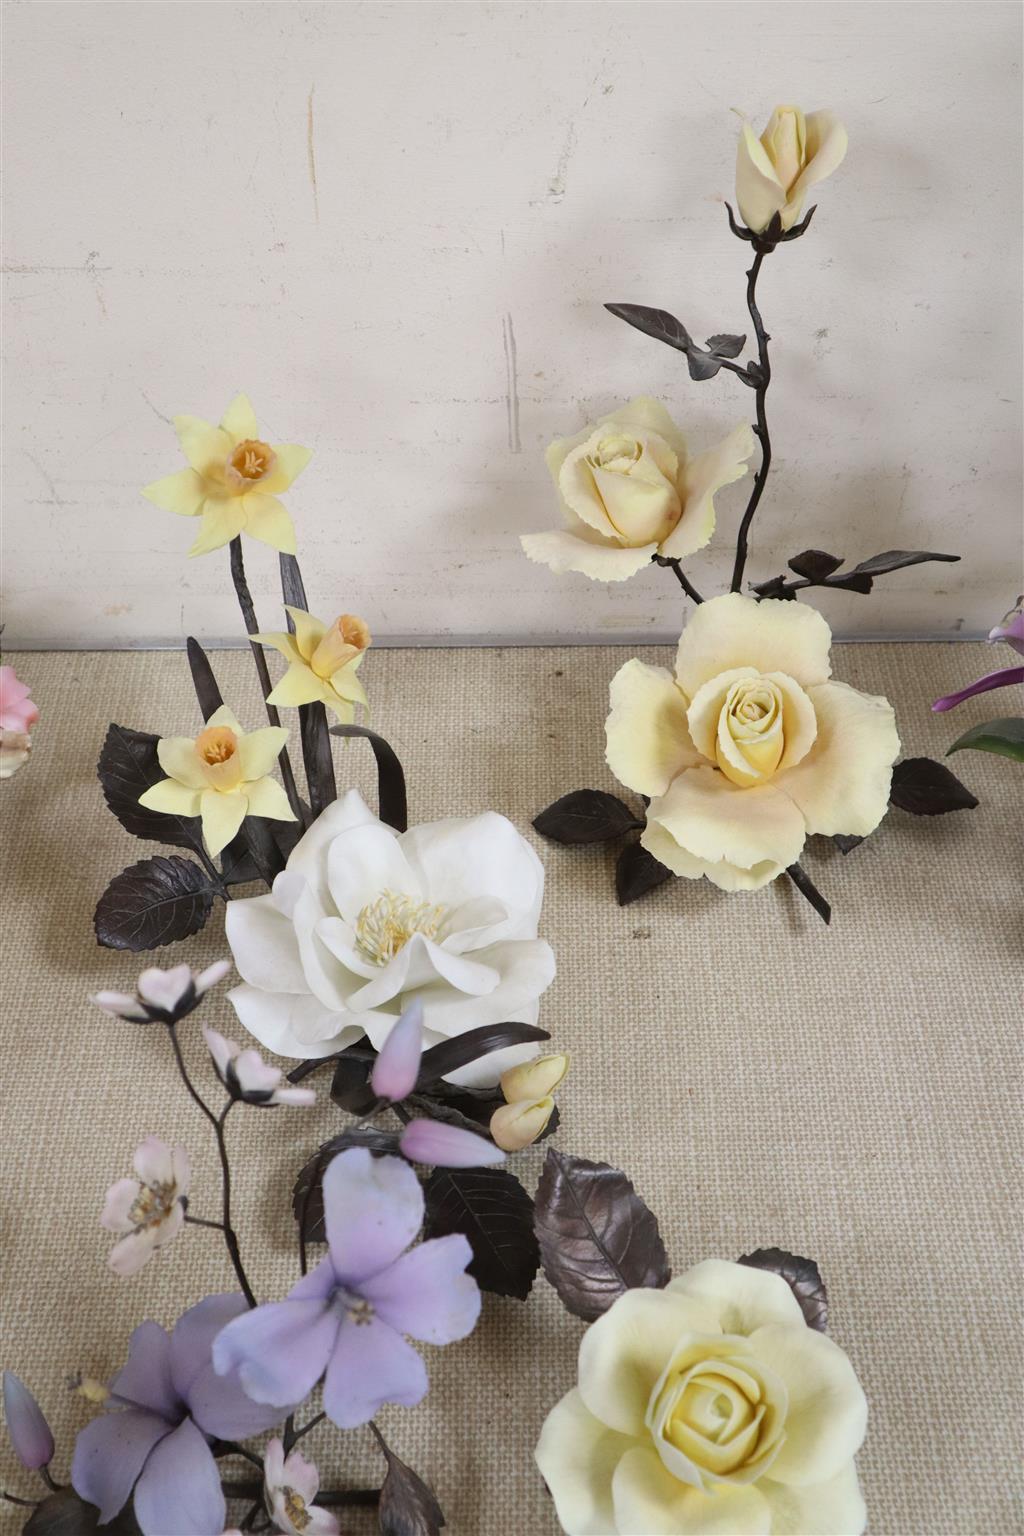 Five Boehm flower groups - two Elegance, Blue Hibiscus with Peach Blossom and another Princess Diana Rose with Daffodils and Yellow Ros